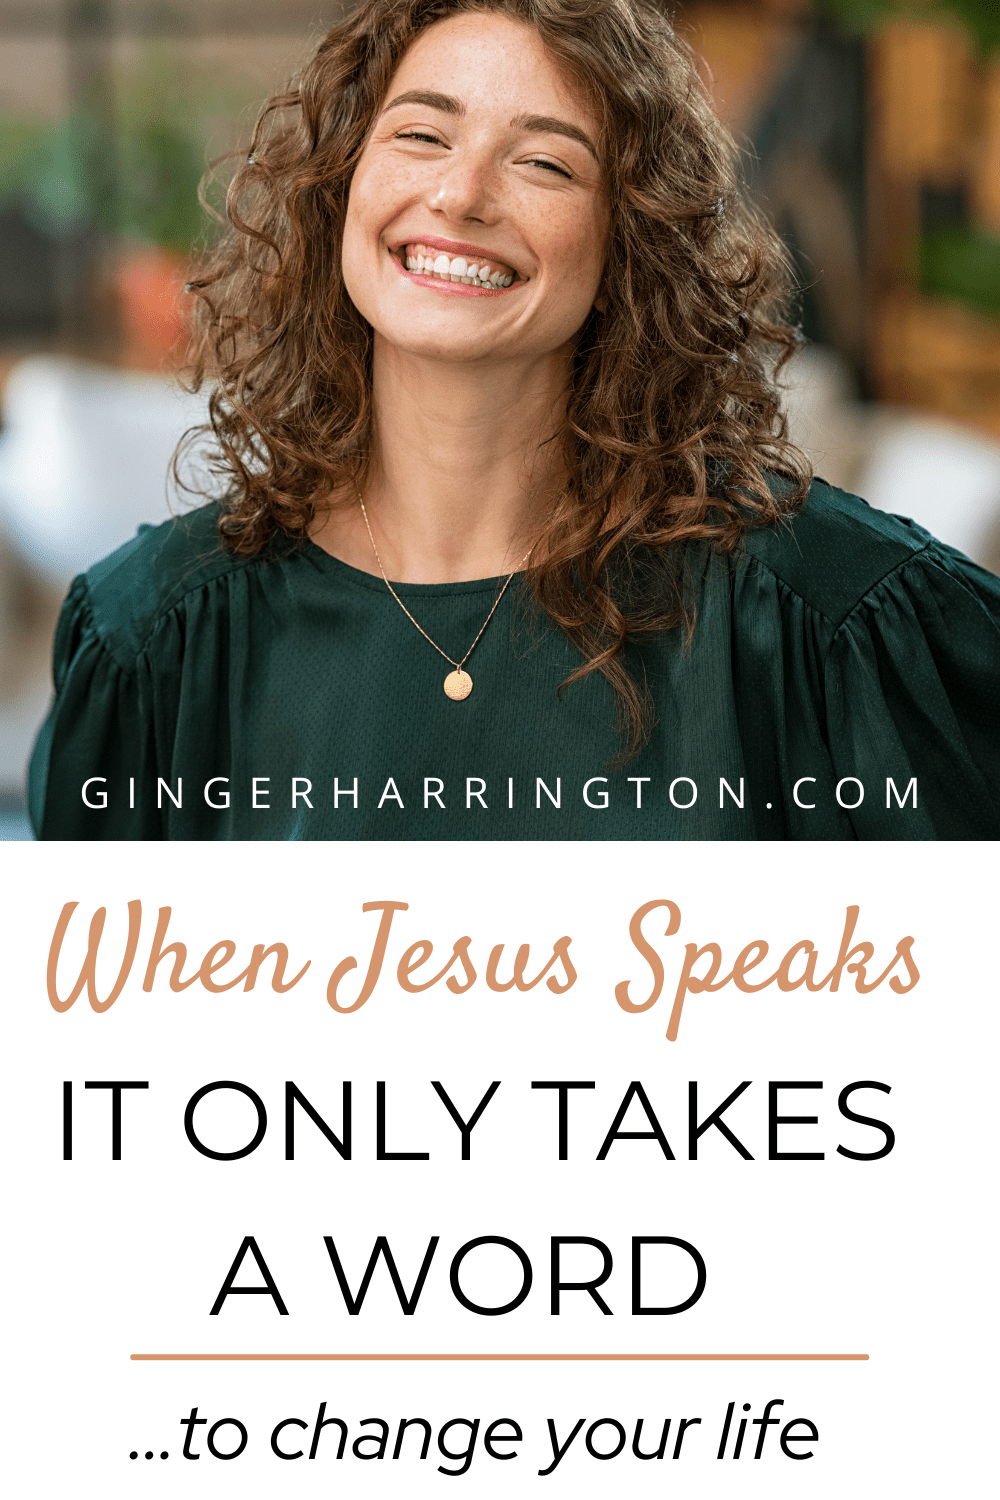 Woman in a green top smiles to show the difference hearing Jesus speak to you can make.